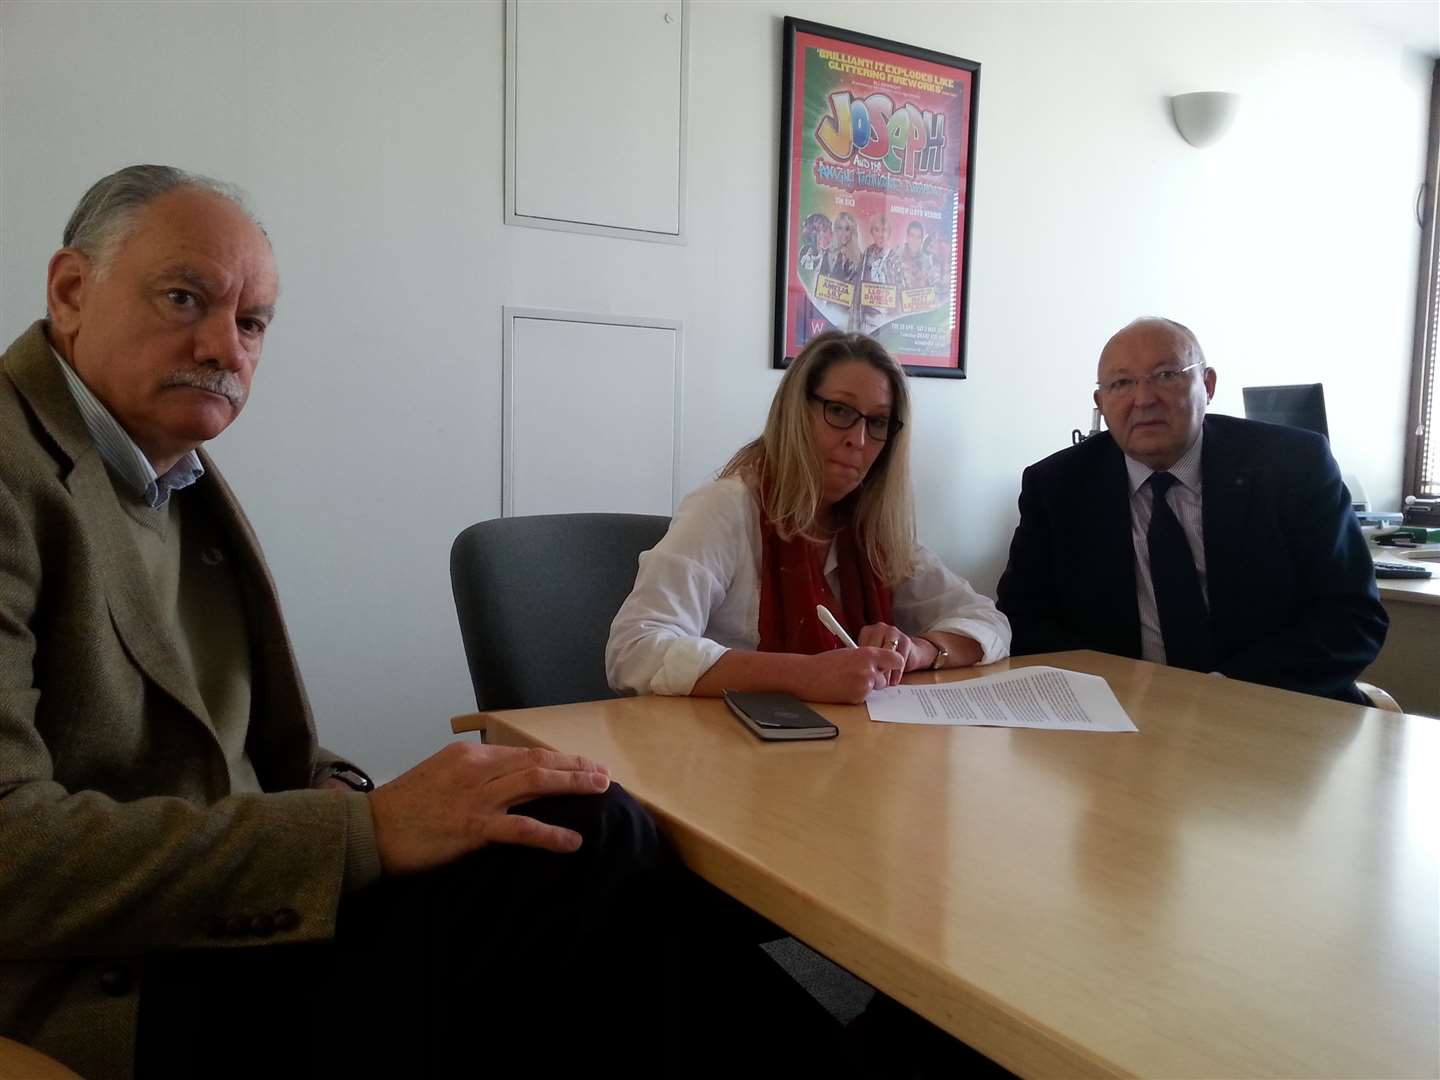 (L-R) Kent County Council's Bryan Sweetland, Chair of Gravesham Rural Forum Kerry Smith and Gravesham council leader John Cubitt signed an open letter to government opposing the Lower Thames Crossing